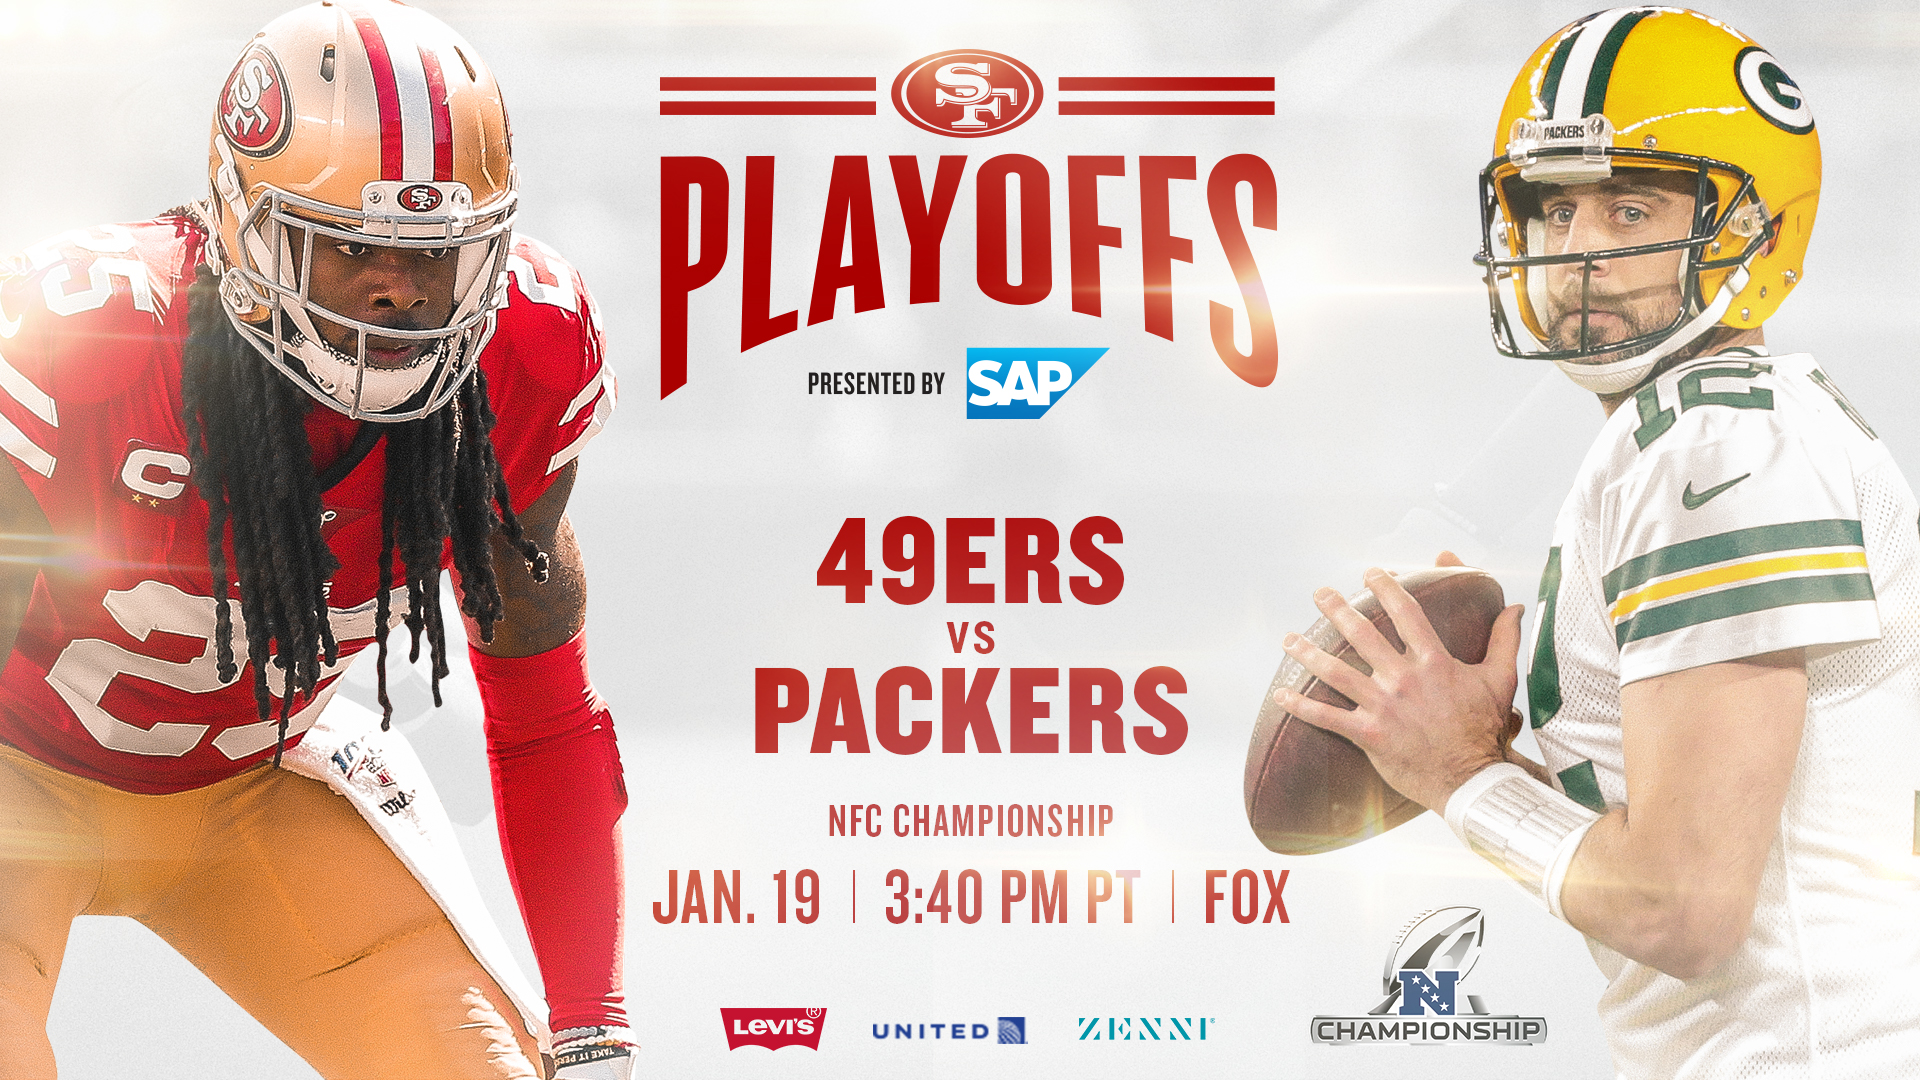 49ers Vs Packers